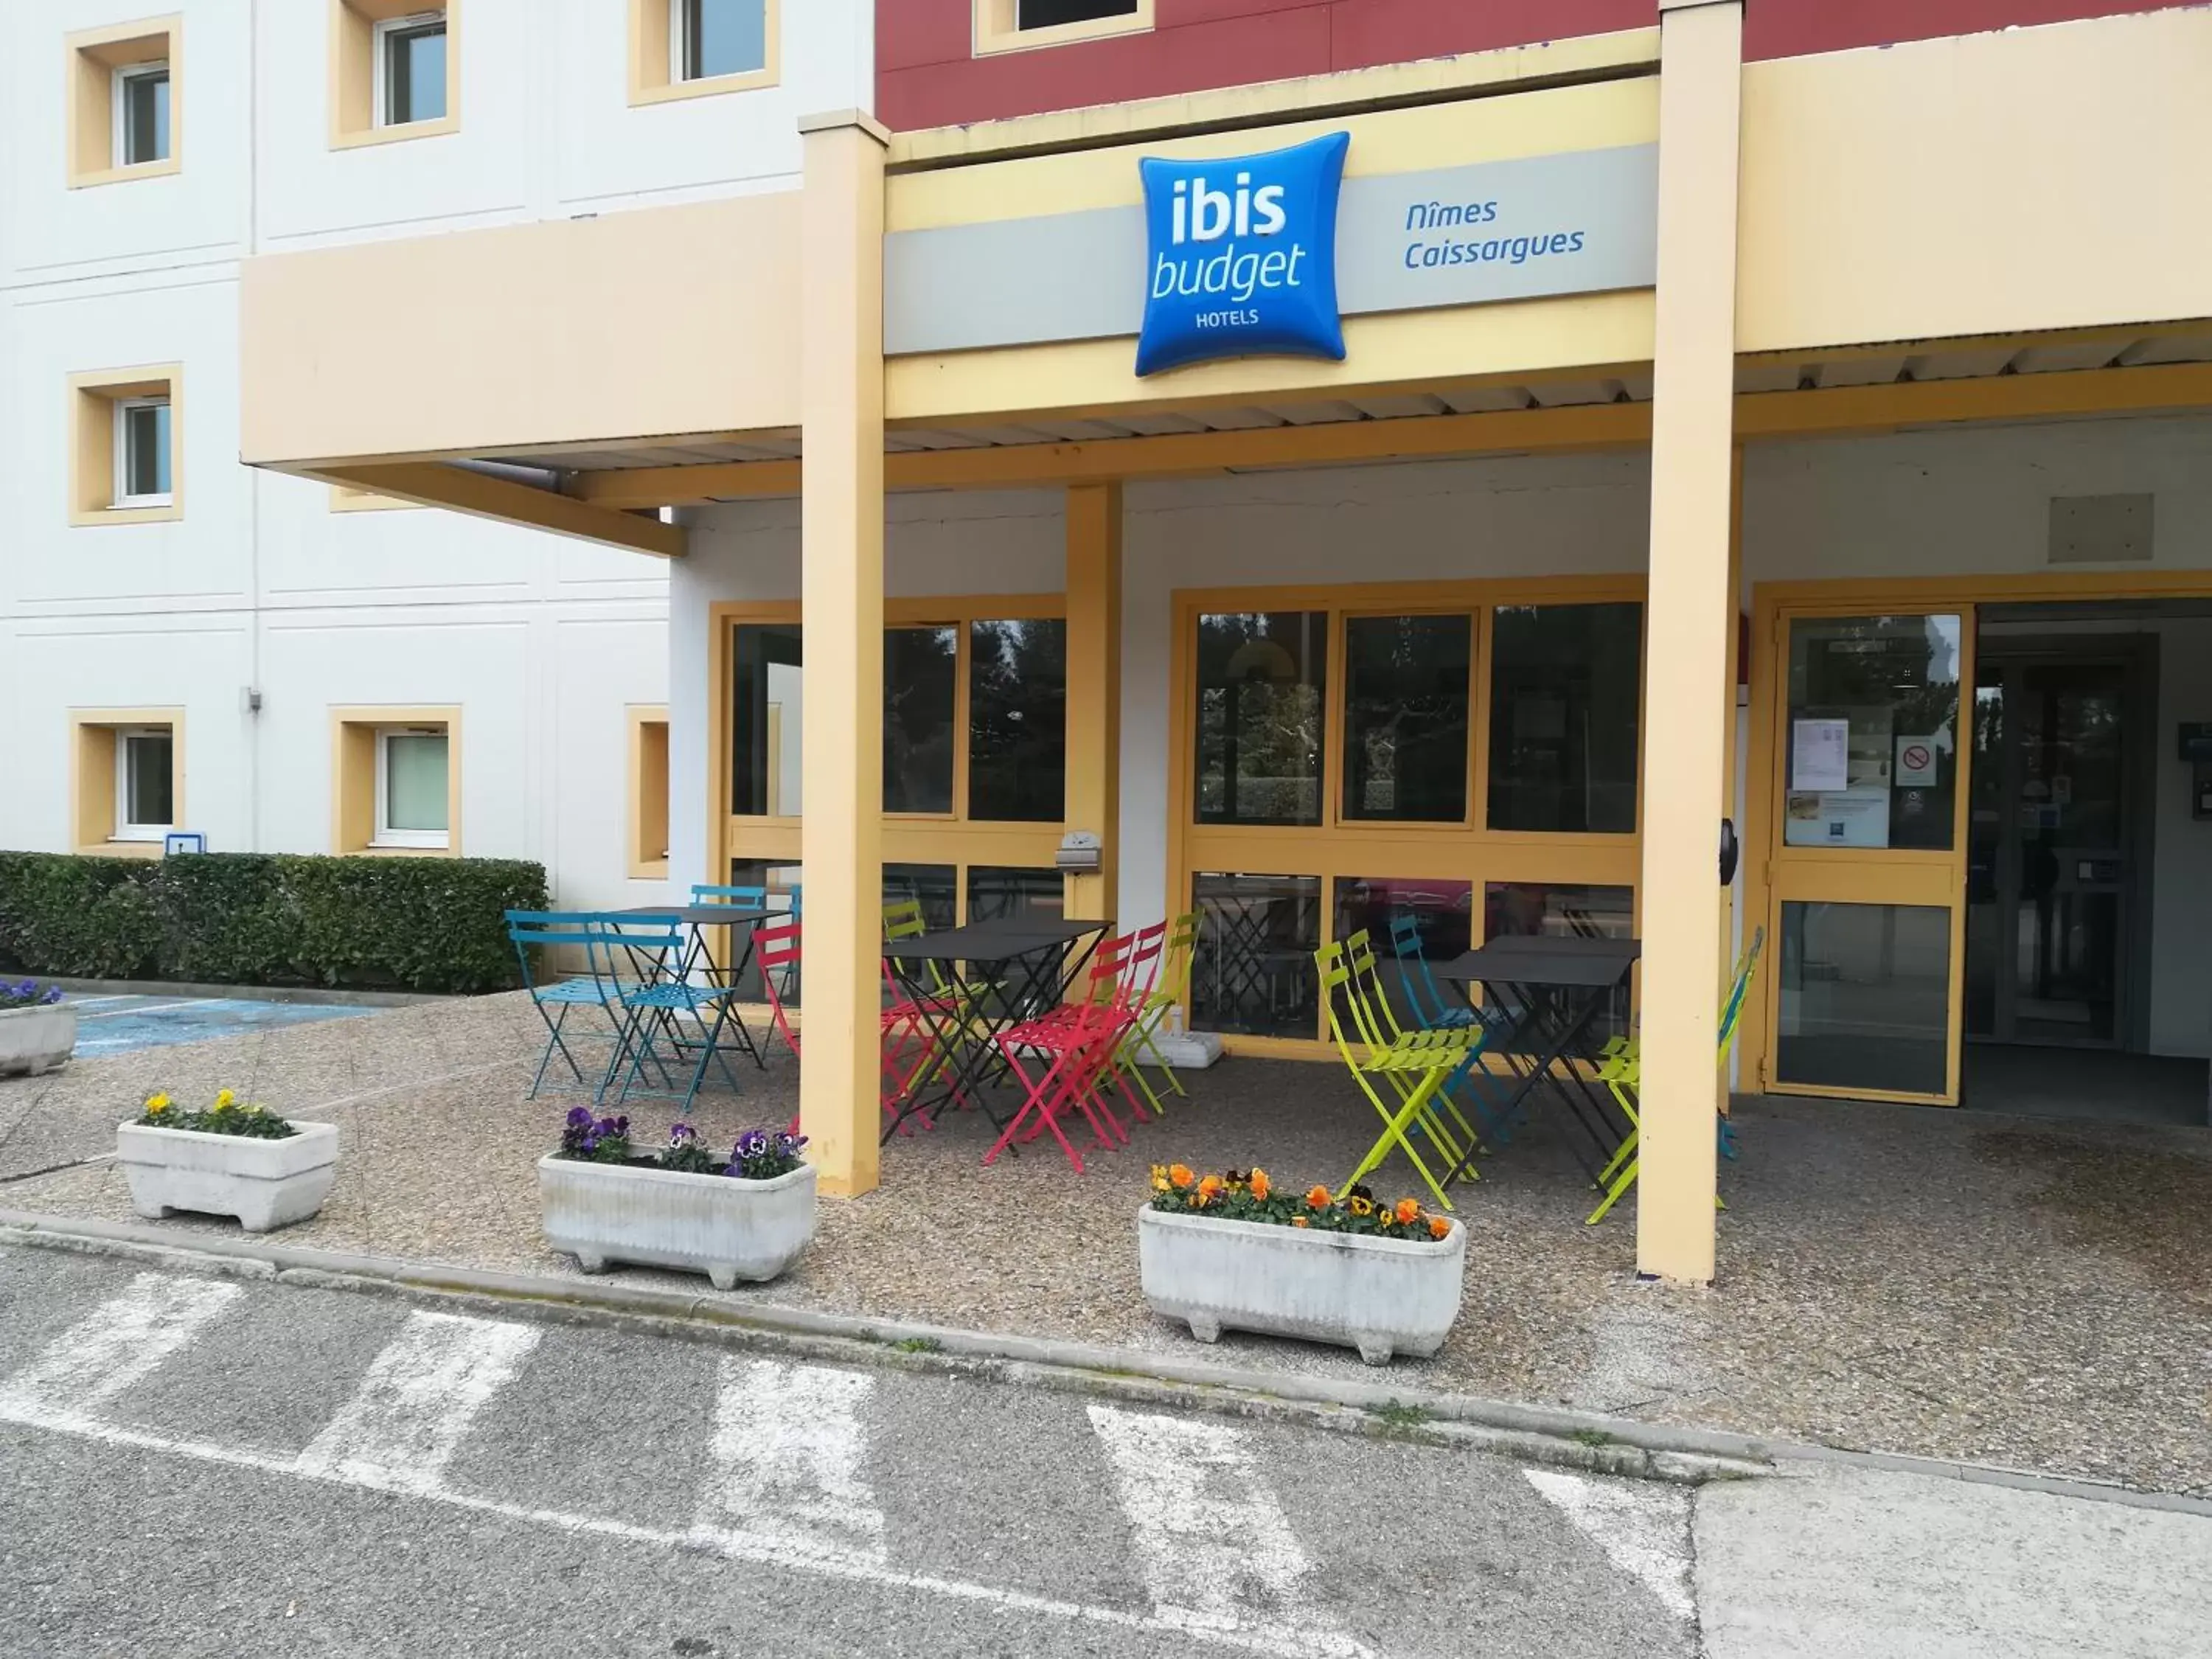 Patio in ibis budget Nimes Caissargues